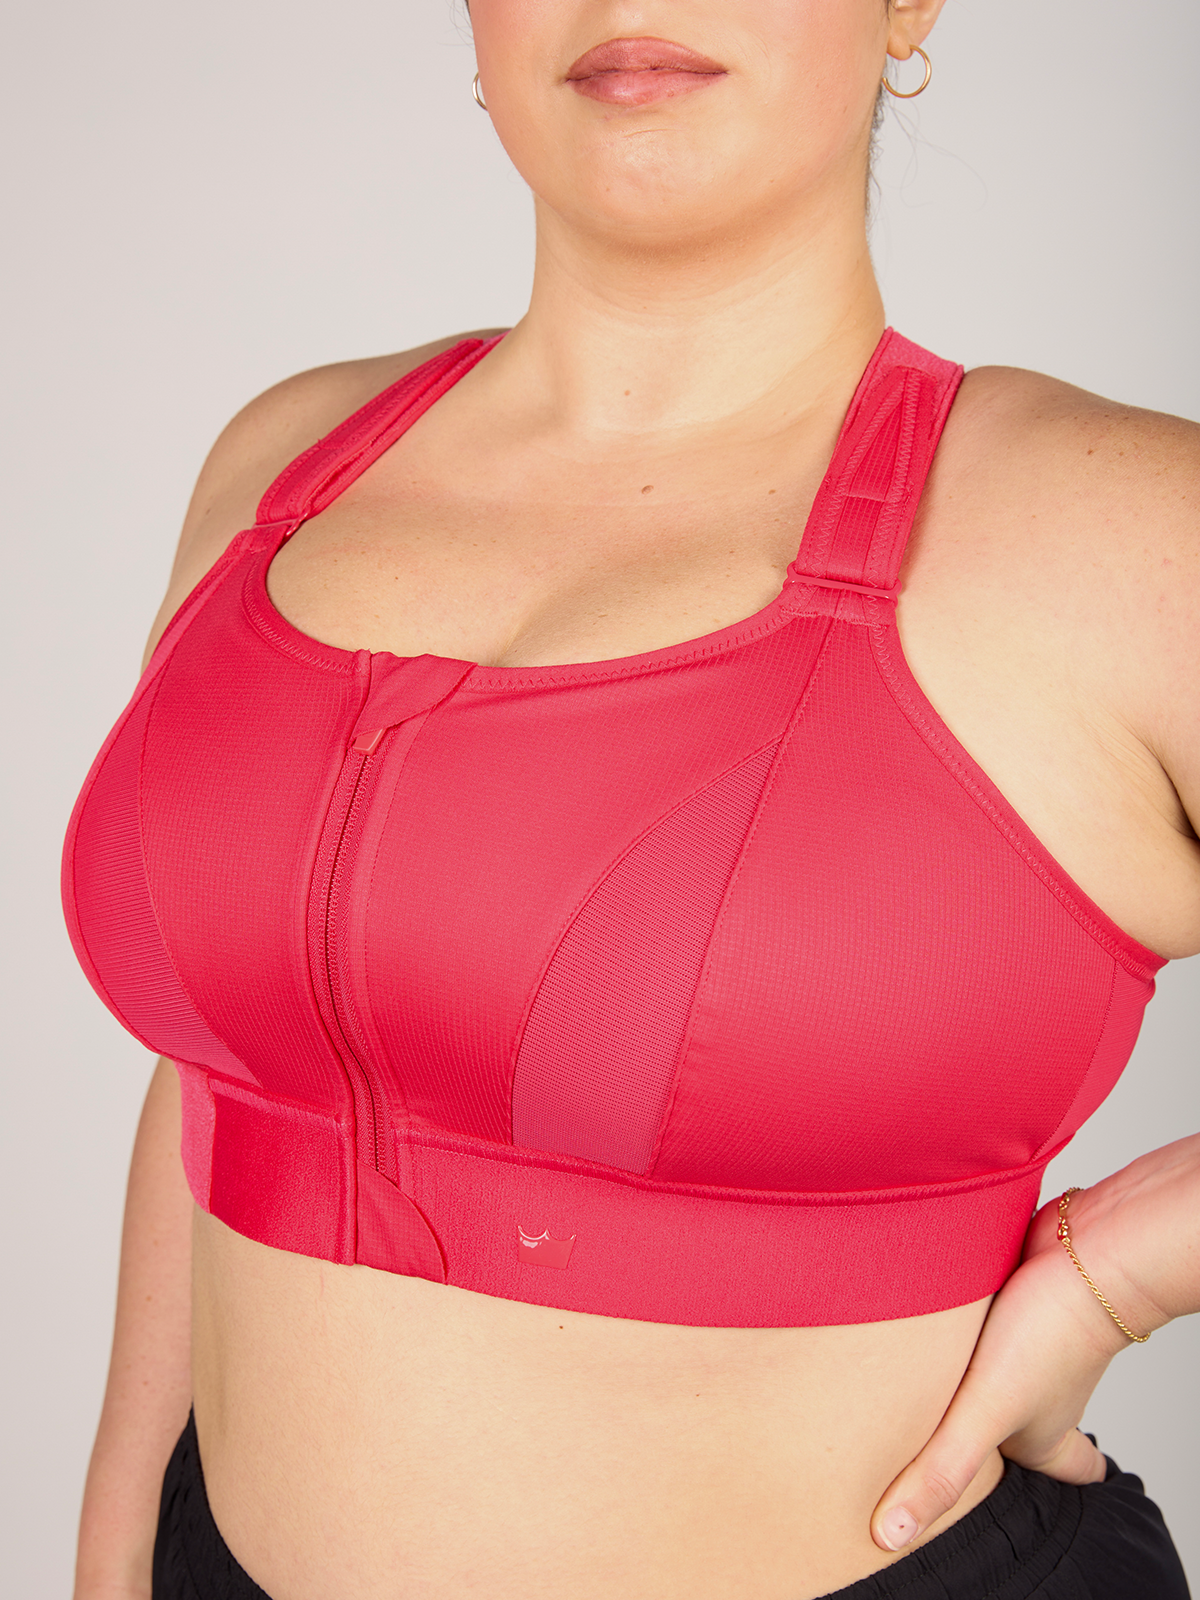 adviicd She Fit Sports Bras Women's Ego Boost Add-A-Size Push Up